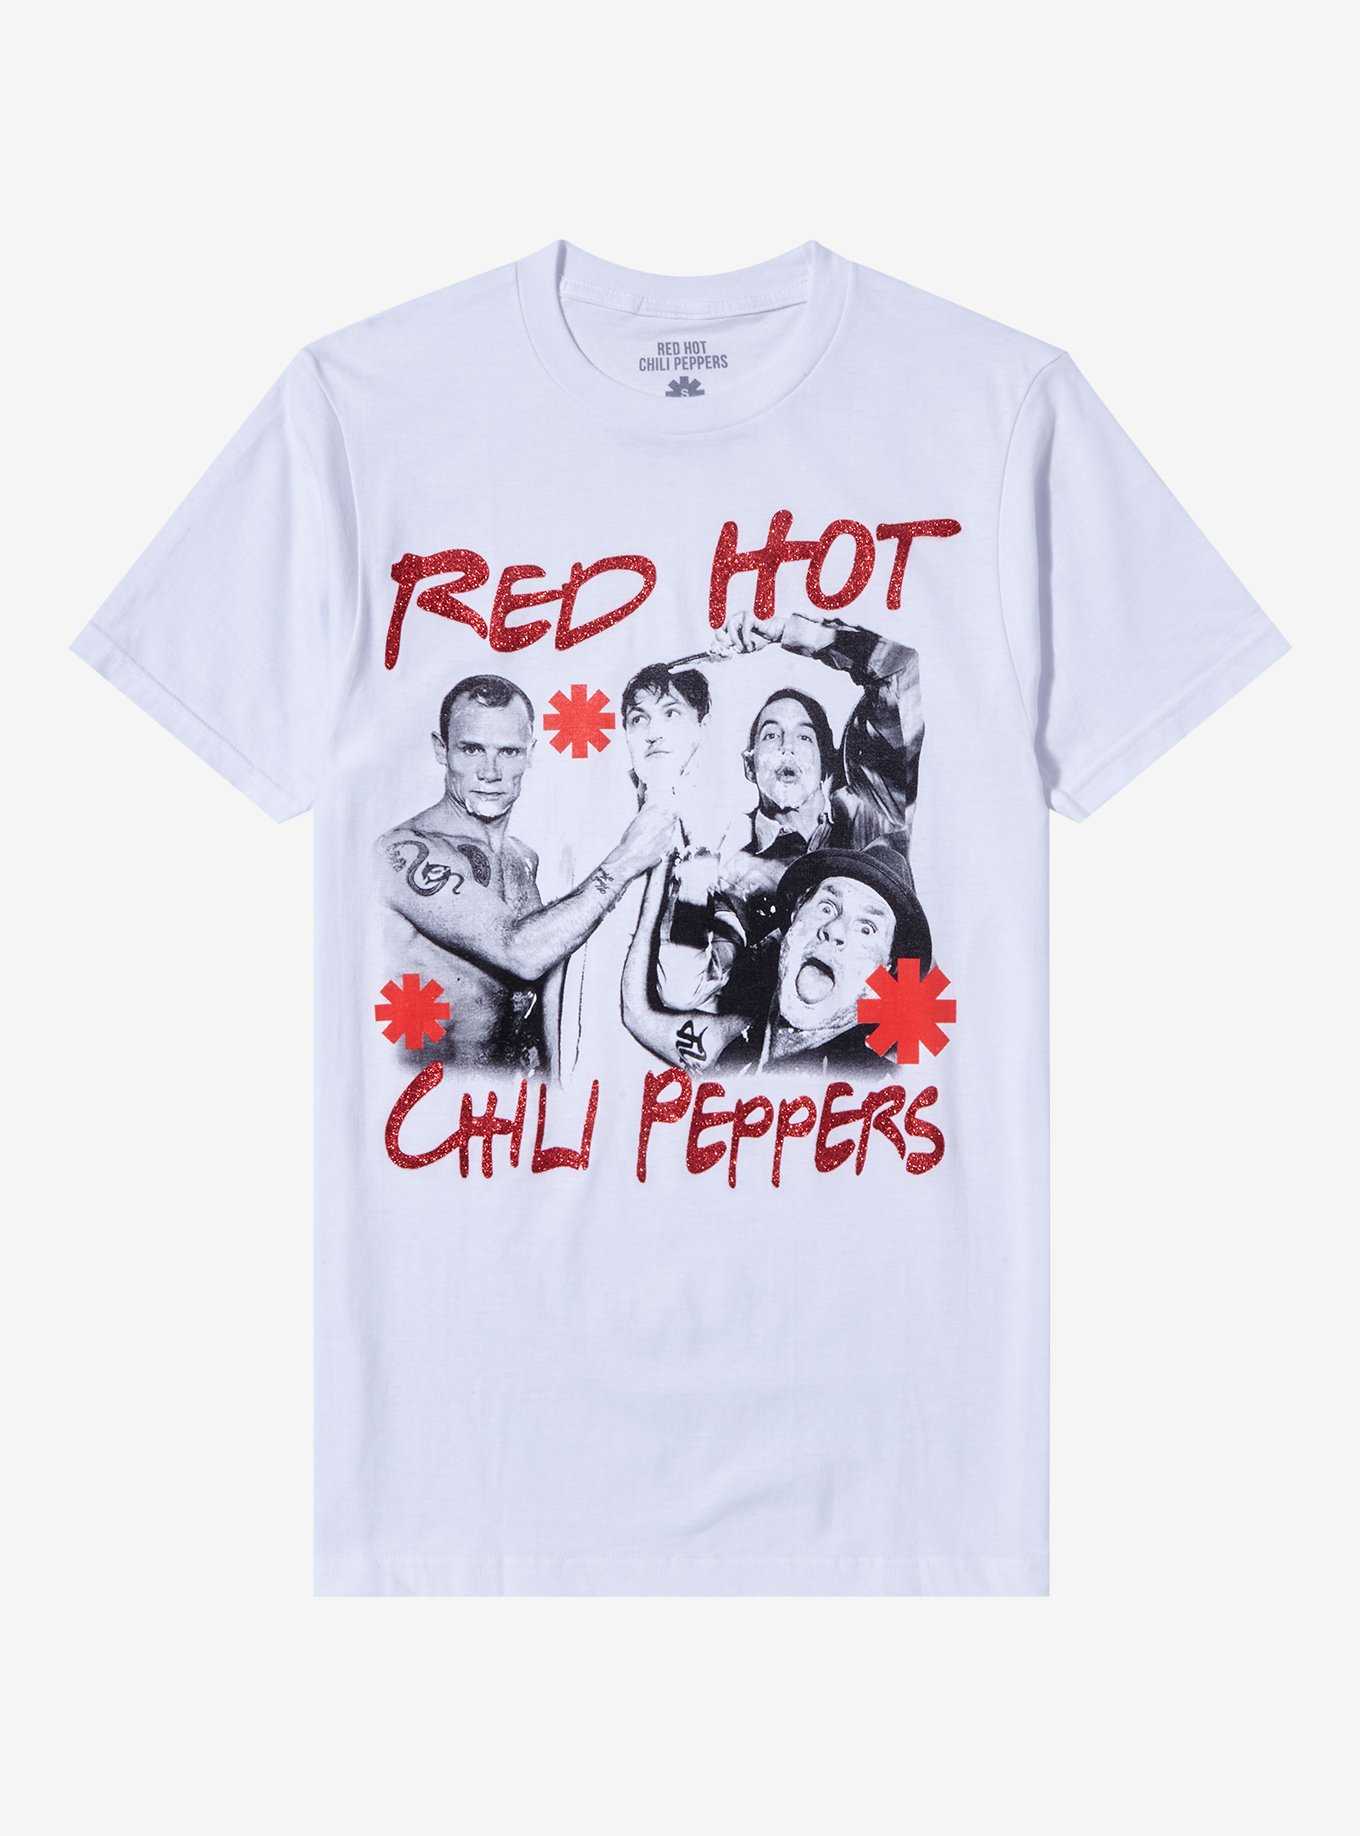 Merch Hot Peppers Red OFFICIAL Topic T-Shirts | Chili & Hot